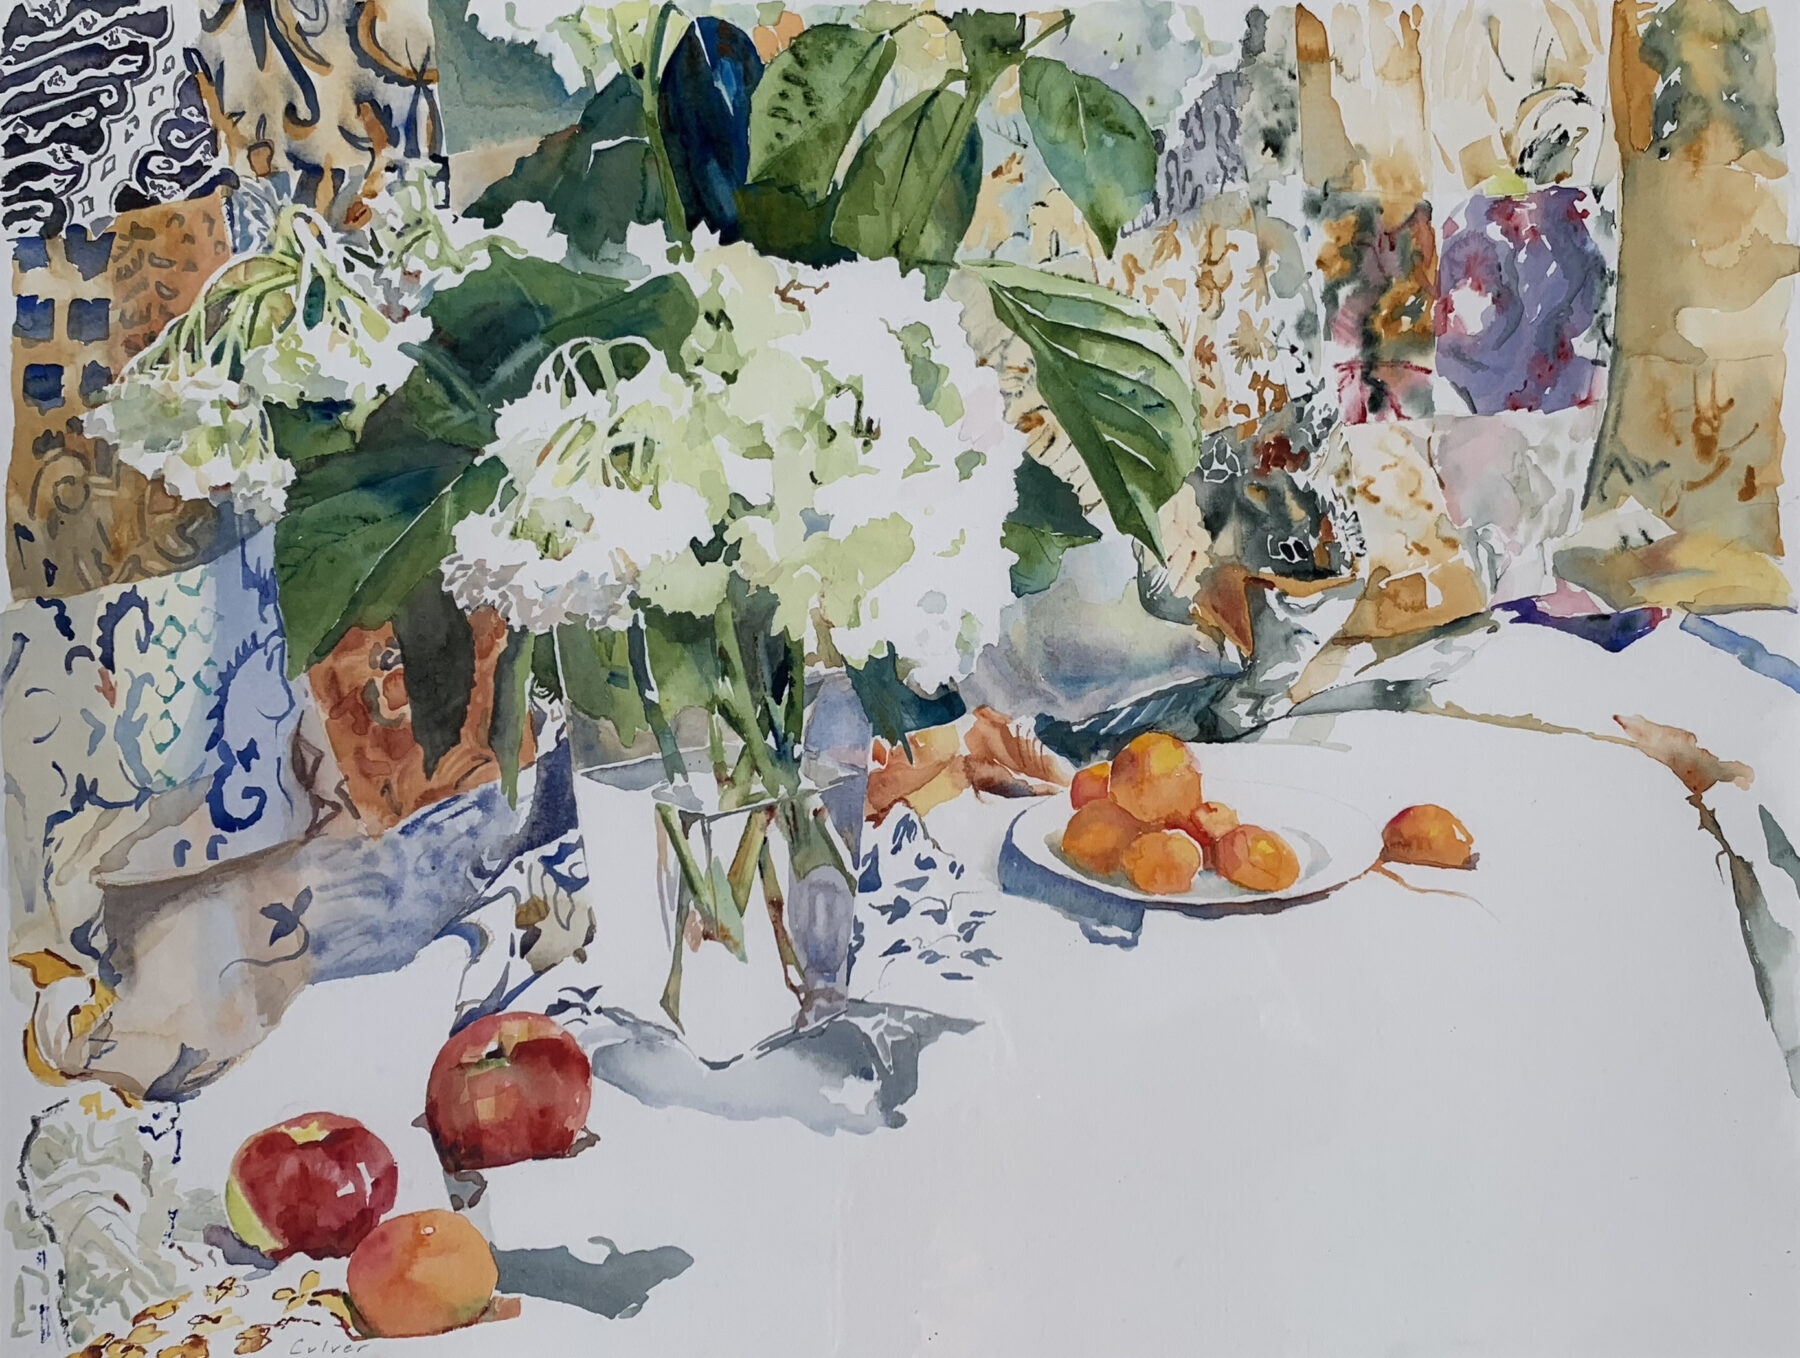 A watercolor titled "Baroque Nostalgia" by Leigh Culver that shows a vase with white flowers in the center and fruit on a white tablescape.